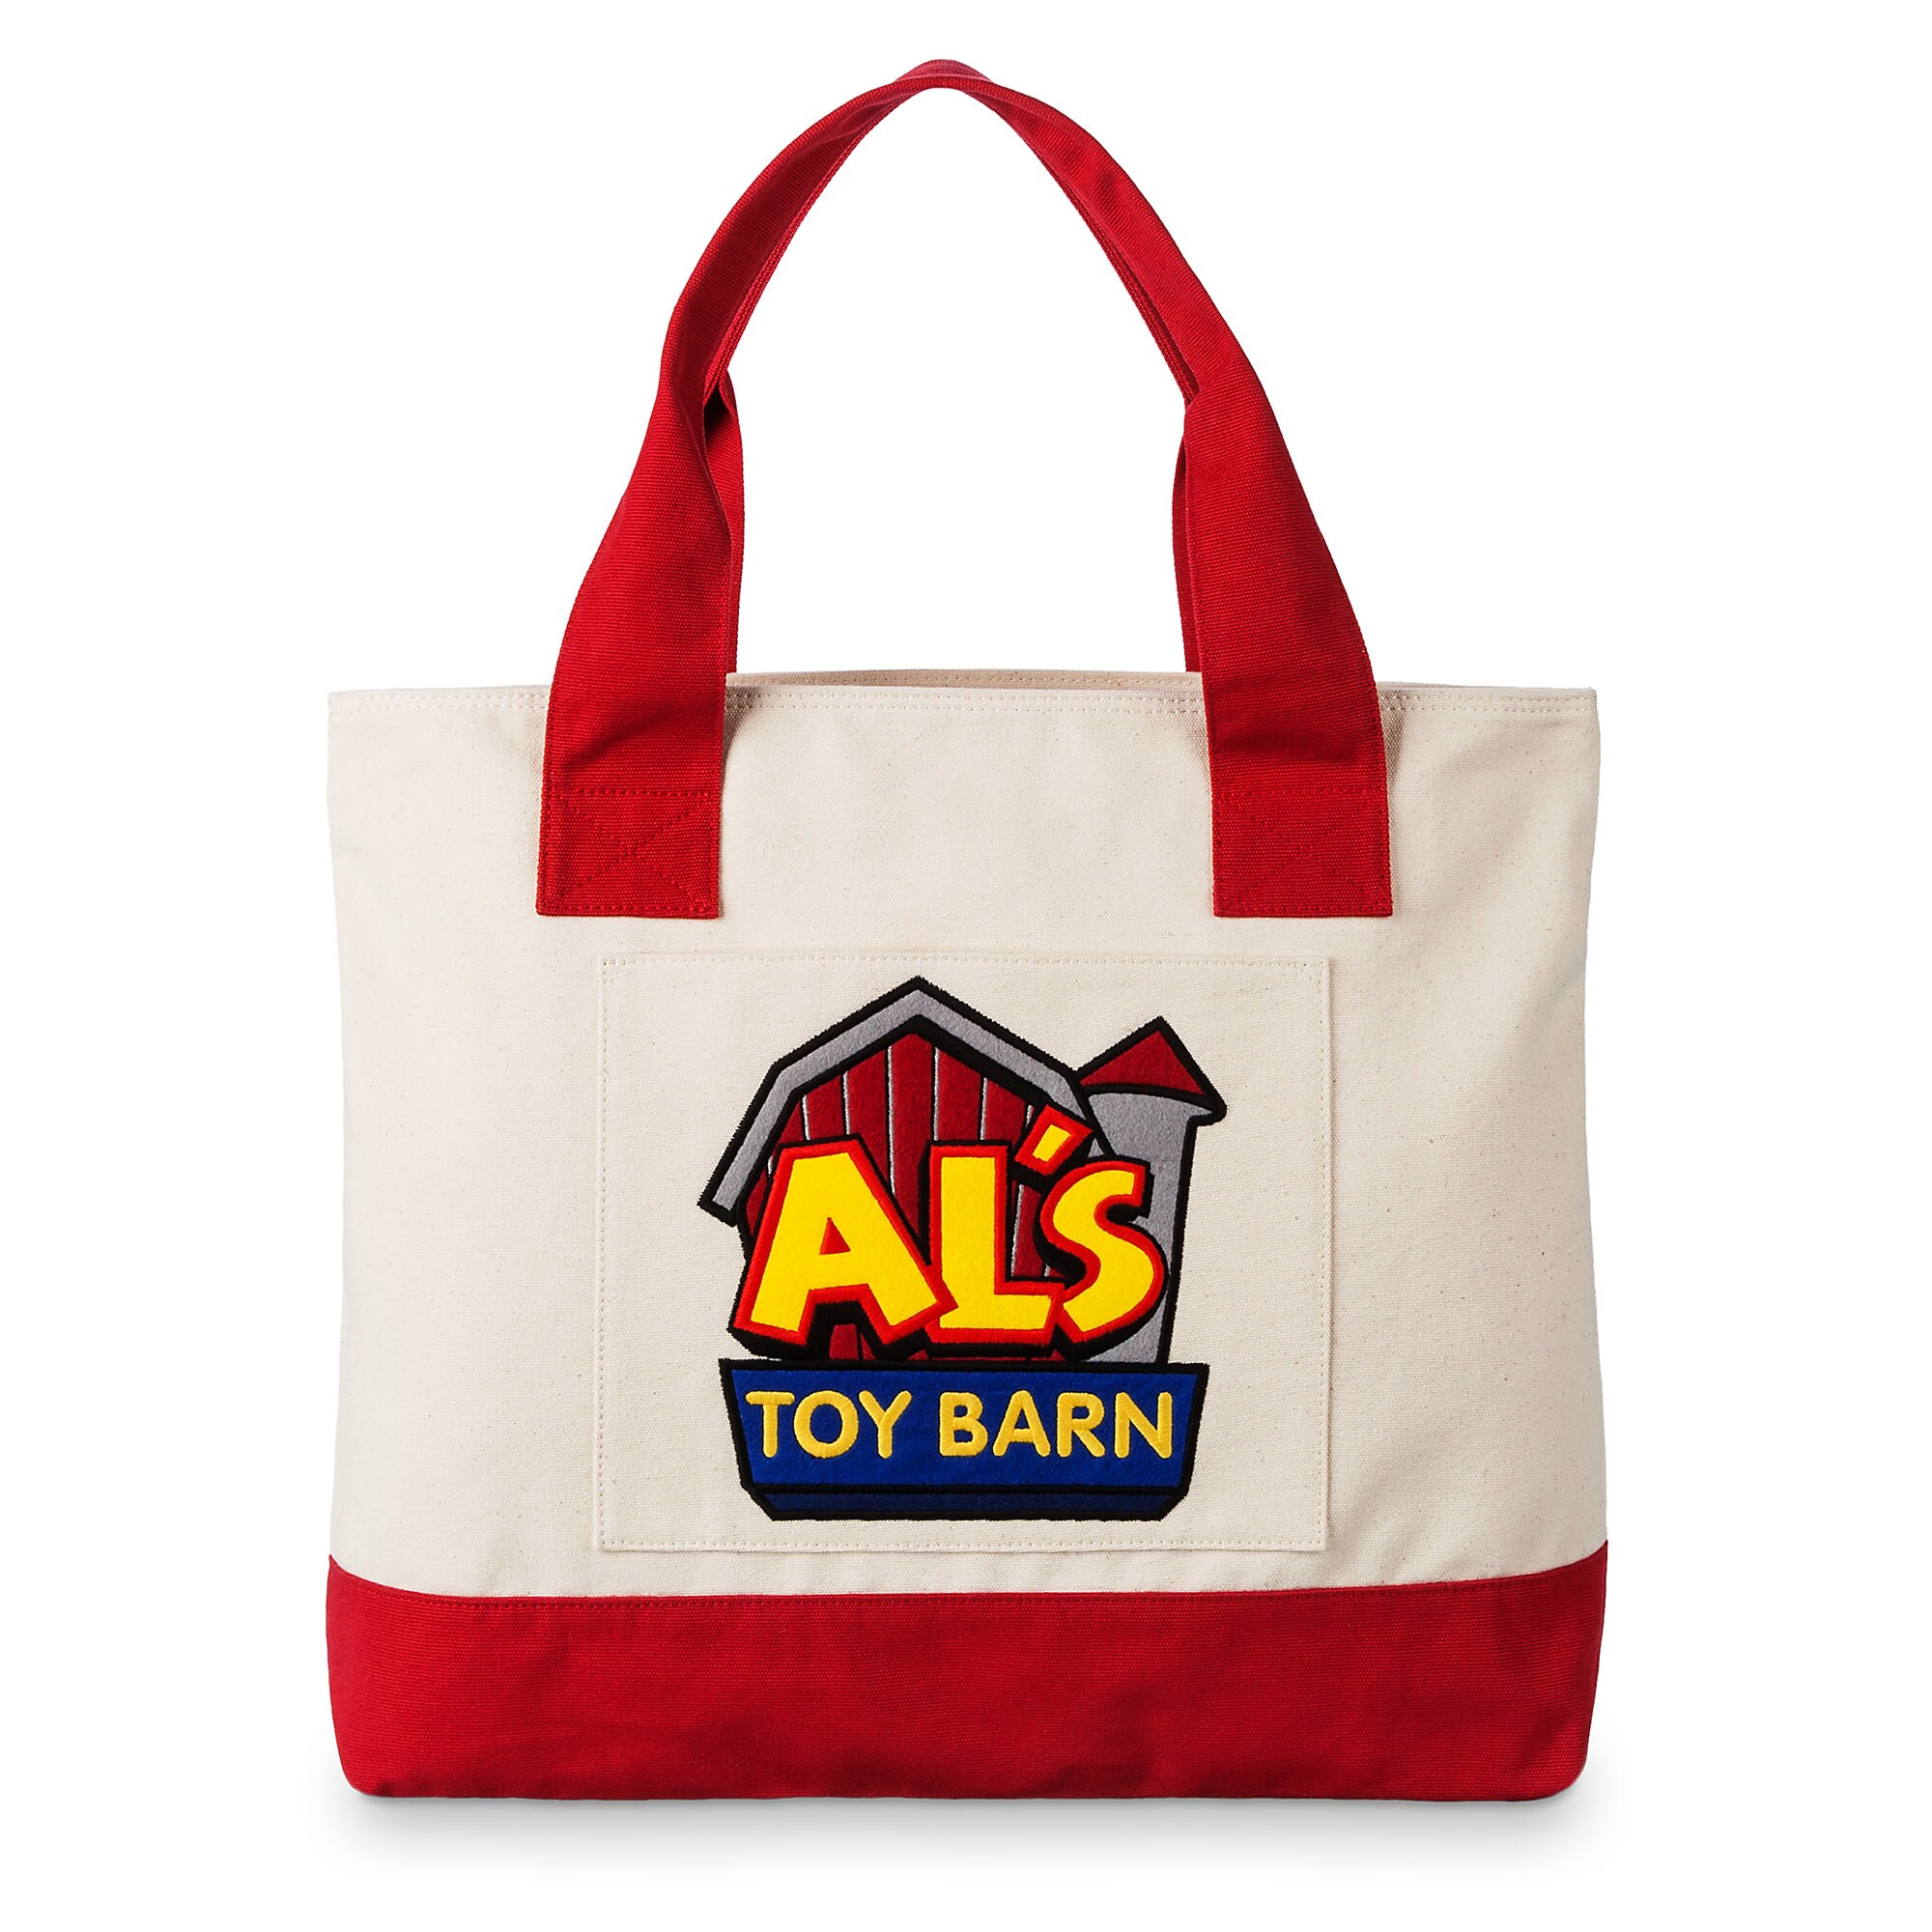 Al's Toy Barn Large Tote Bag - Toy Story